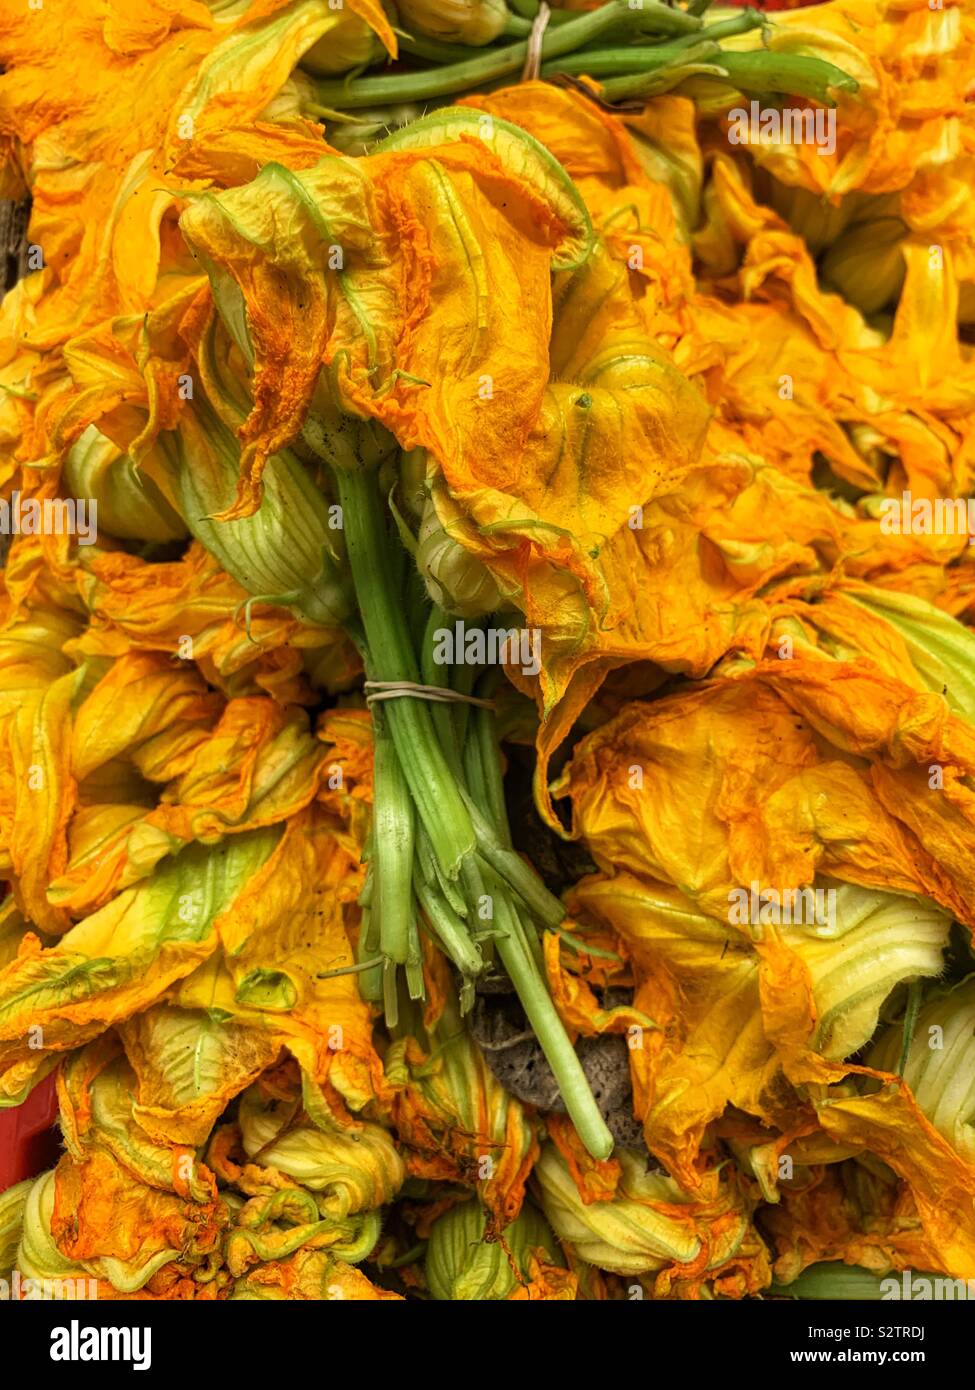 Full frame of a bunch of fresh zucchini flowers for sale. Stock Photo